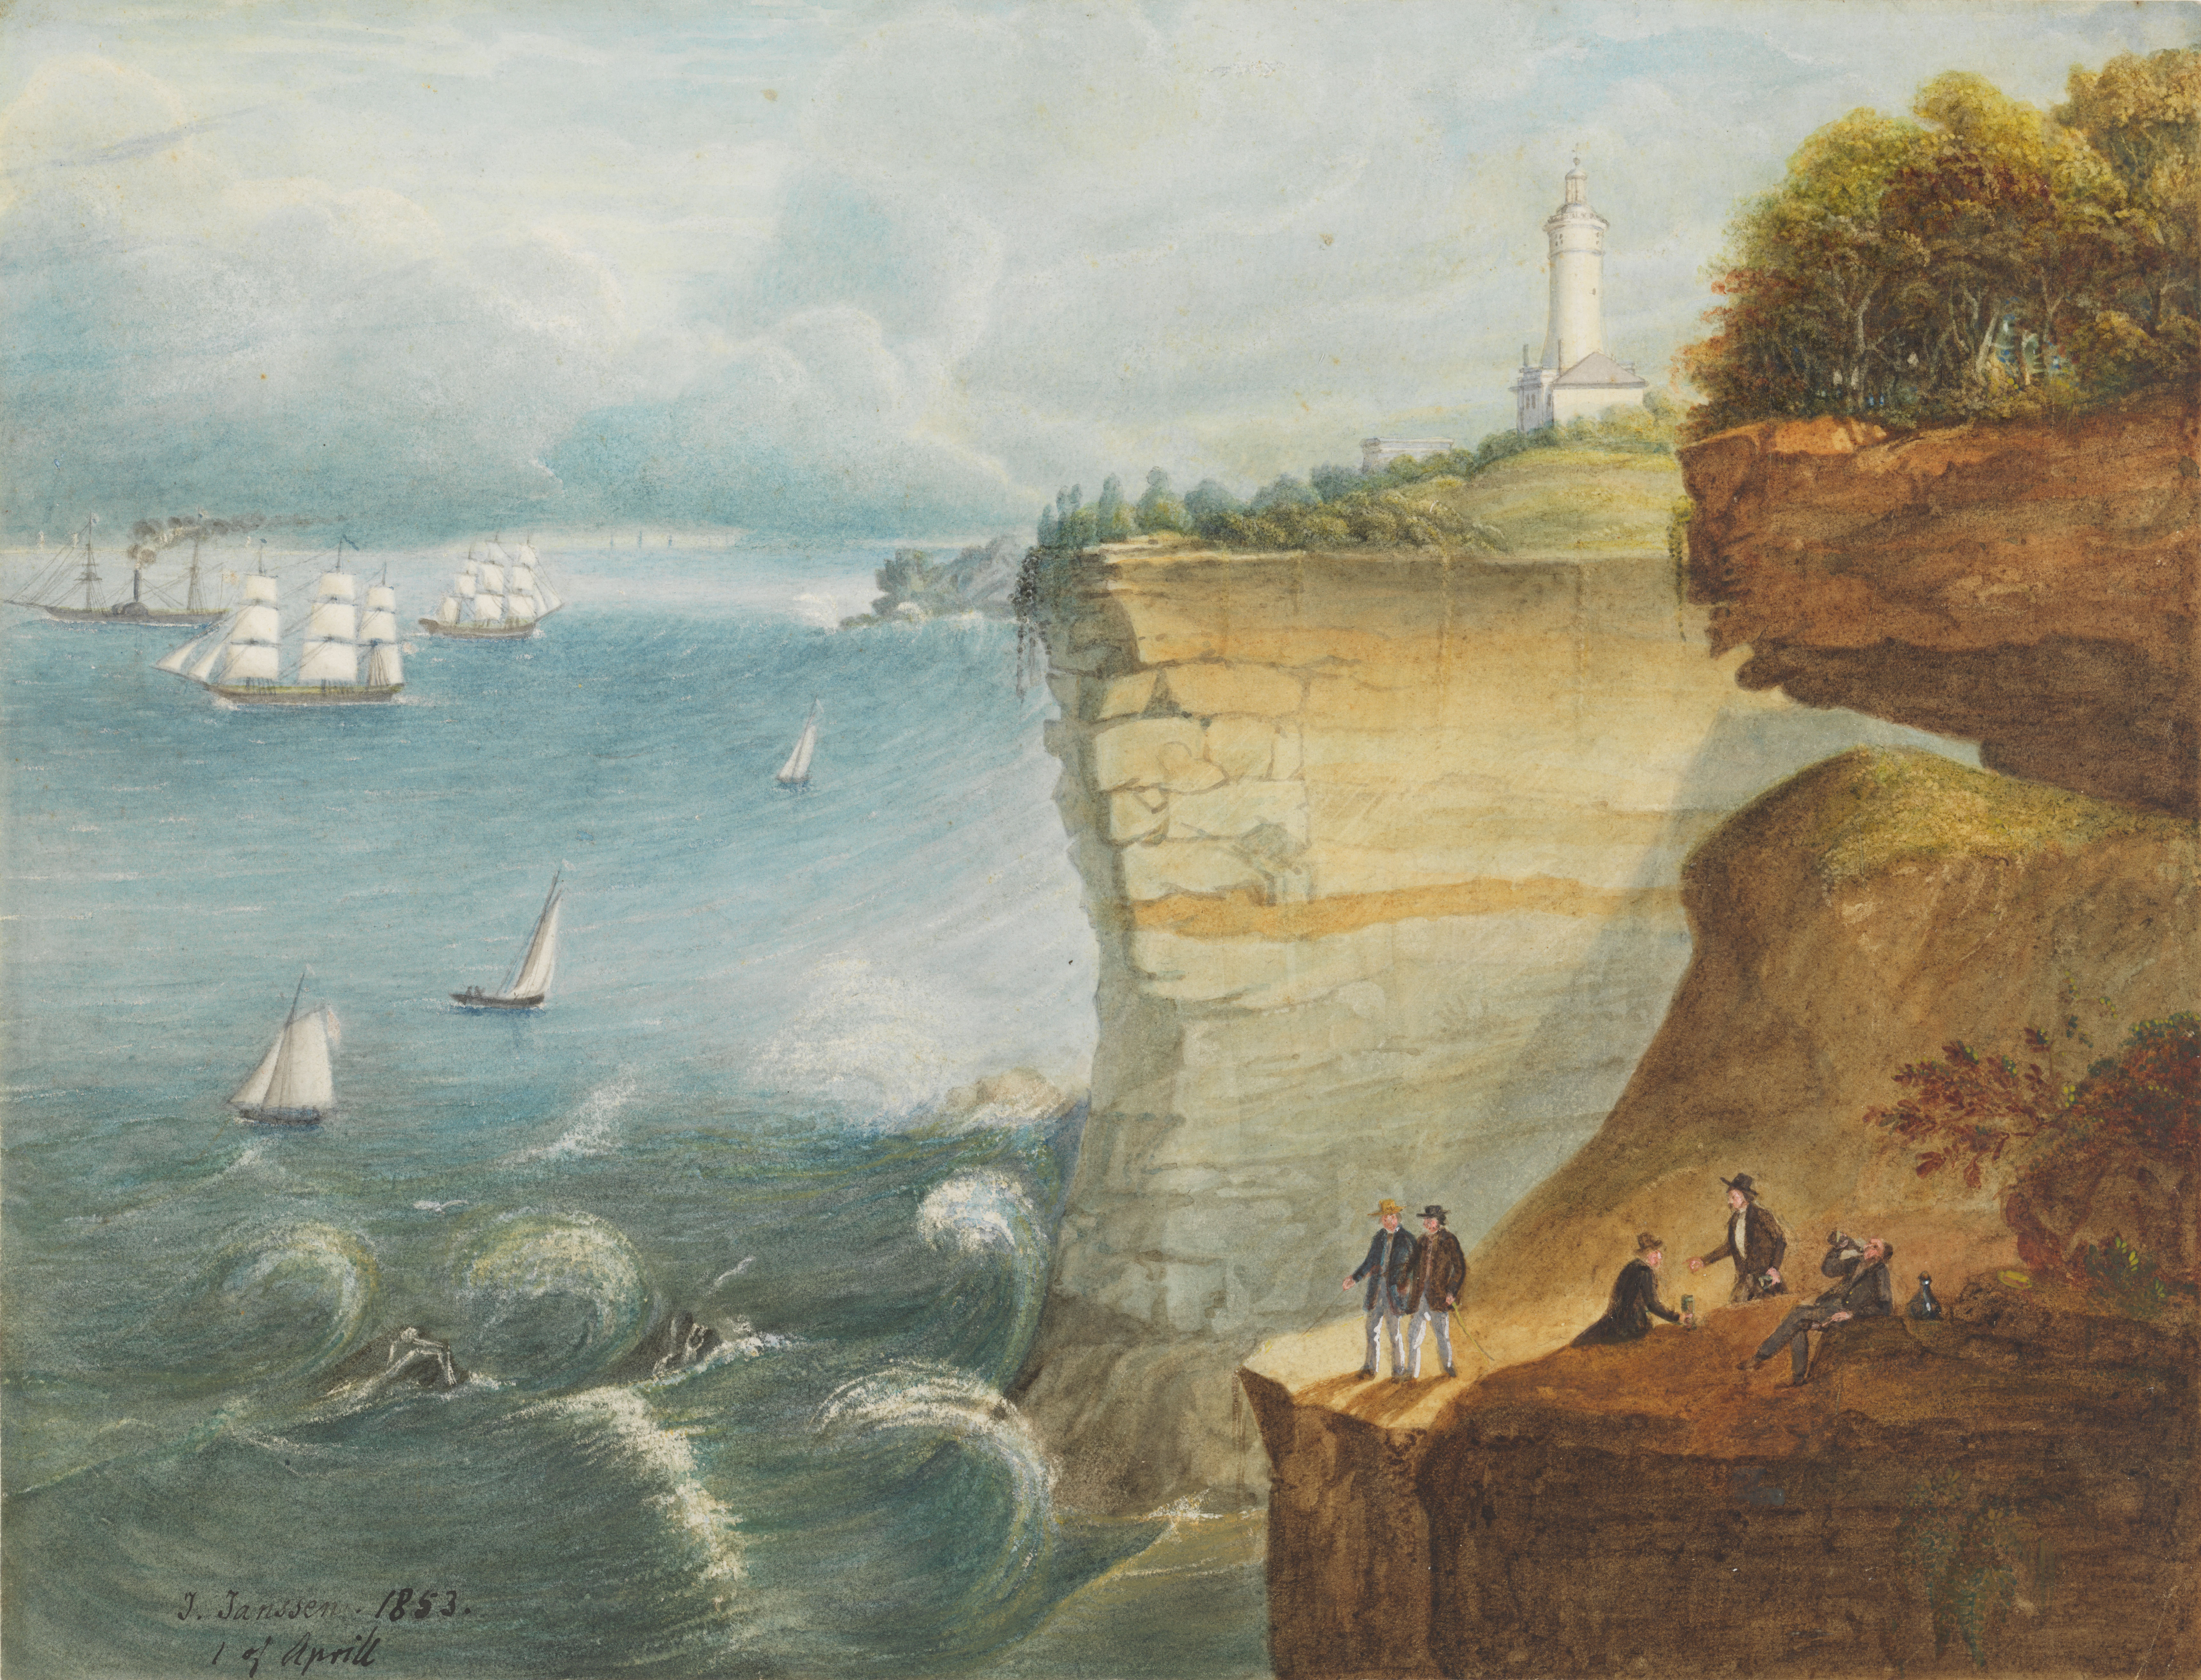 A painting of a cliff by the sea, with several men drinking in the foreground and a lighthouse in the background.